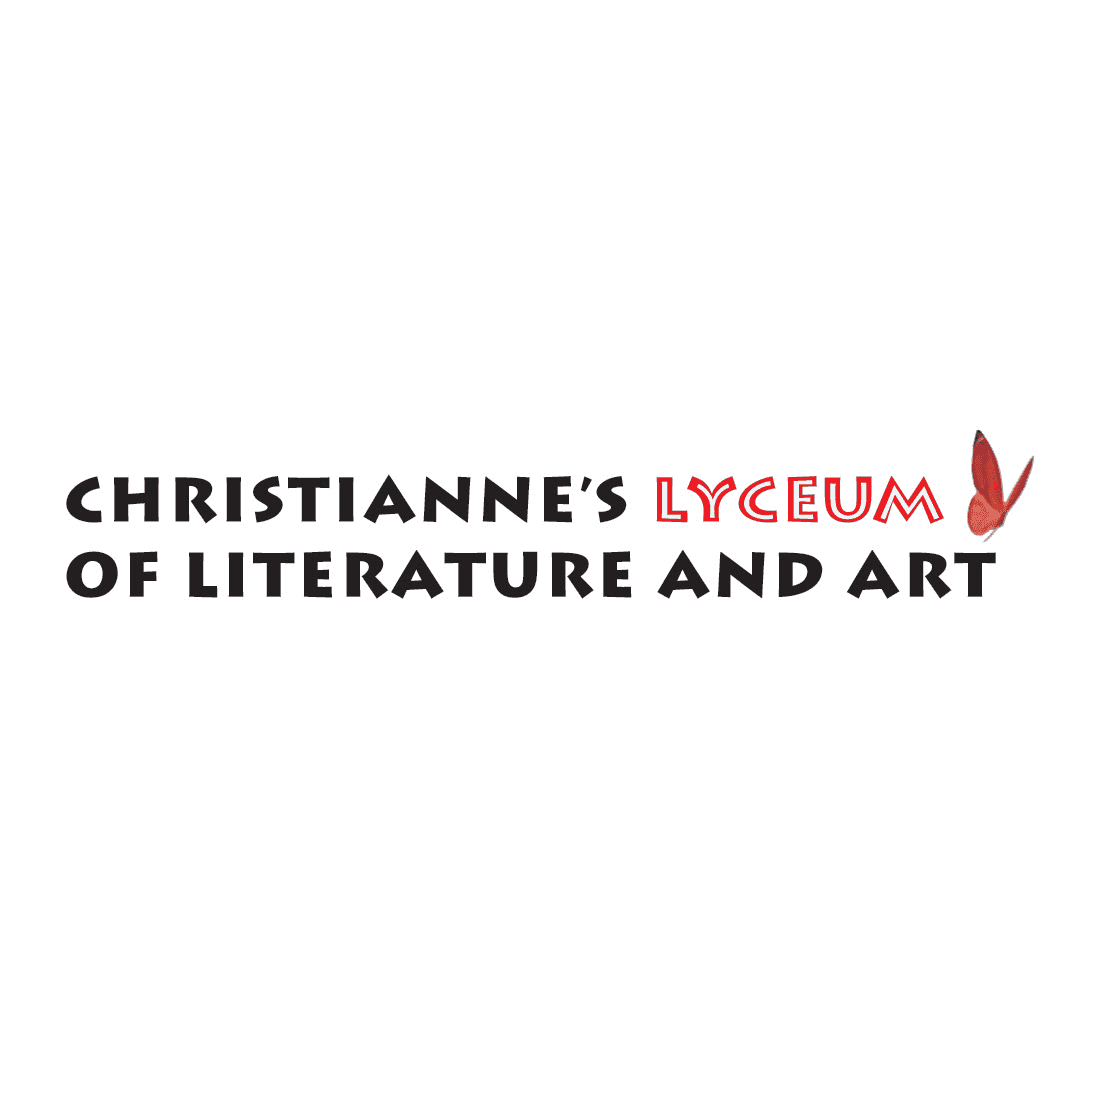 Christianne's Lyceum of Literature and Art logo